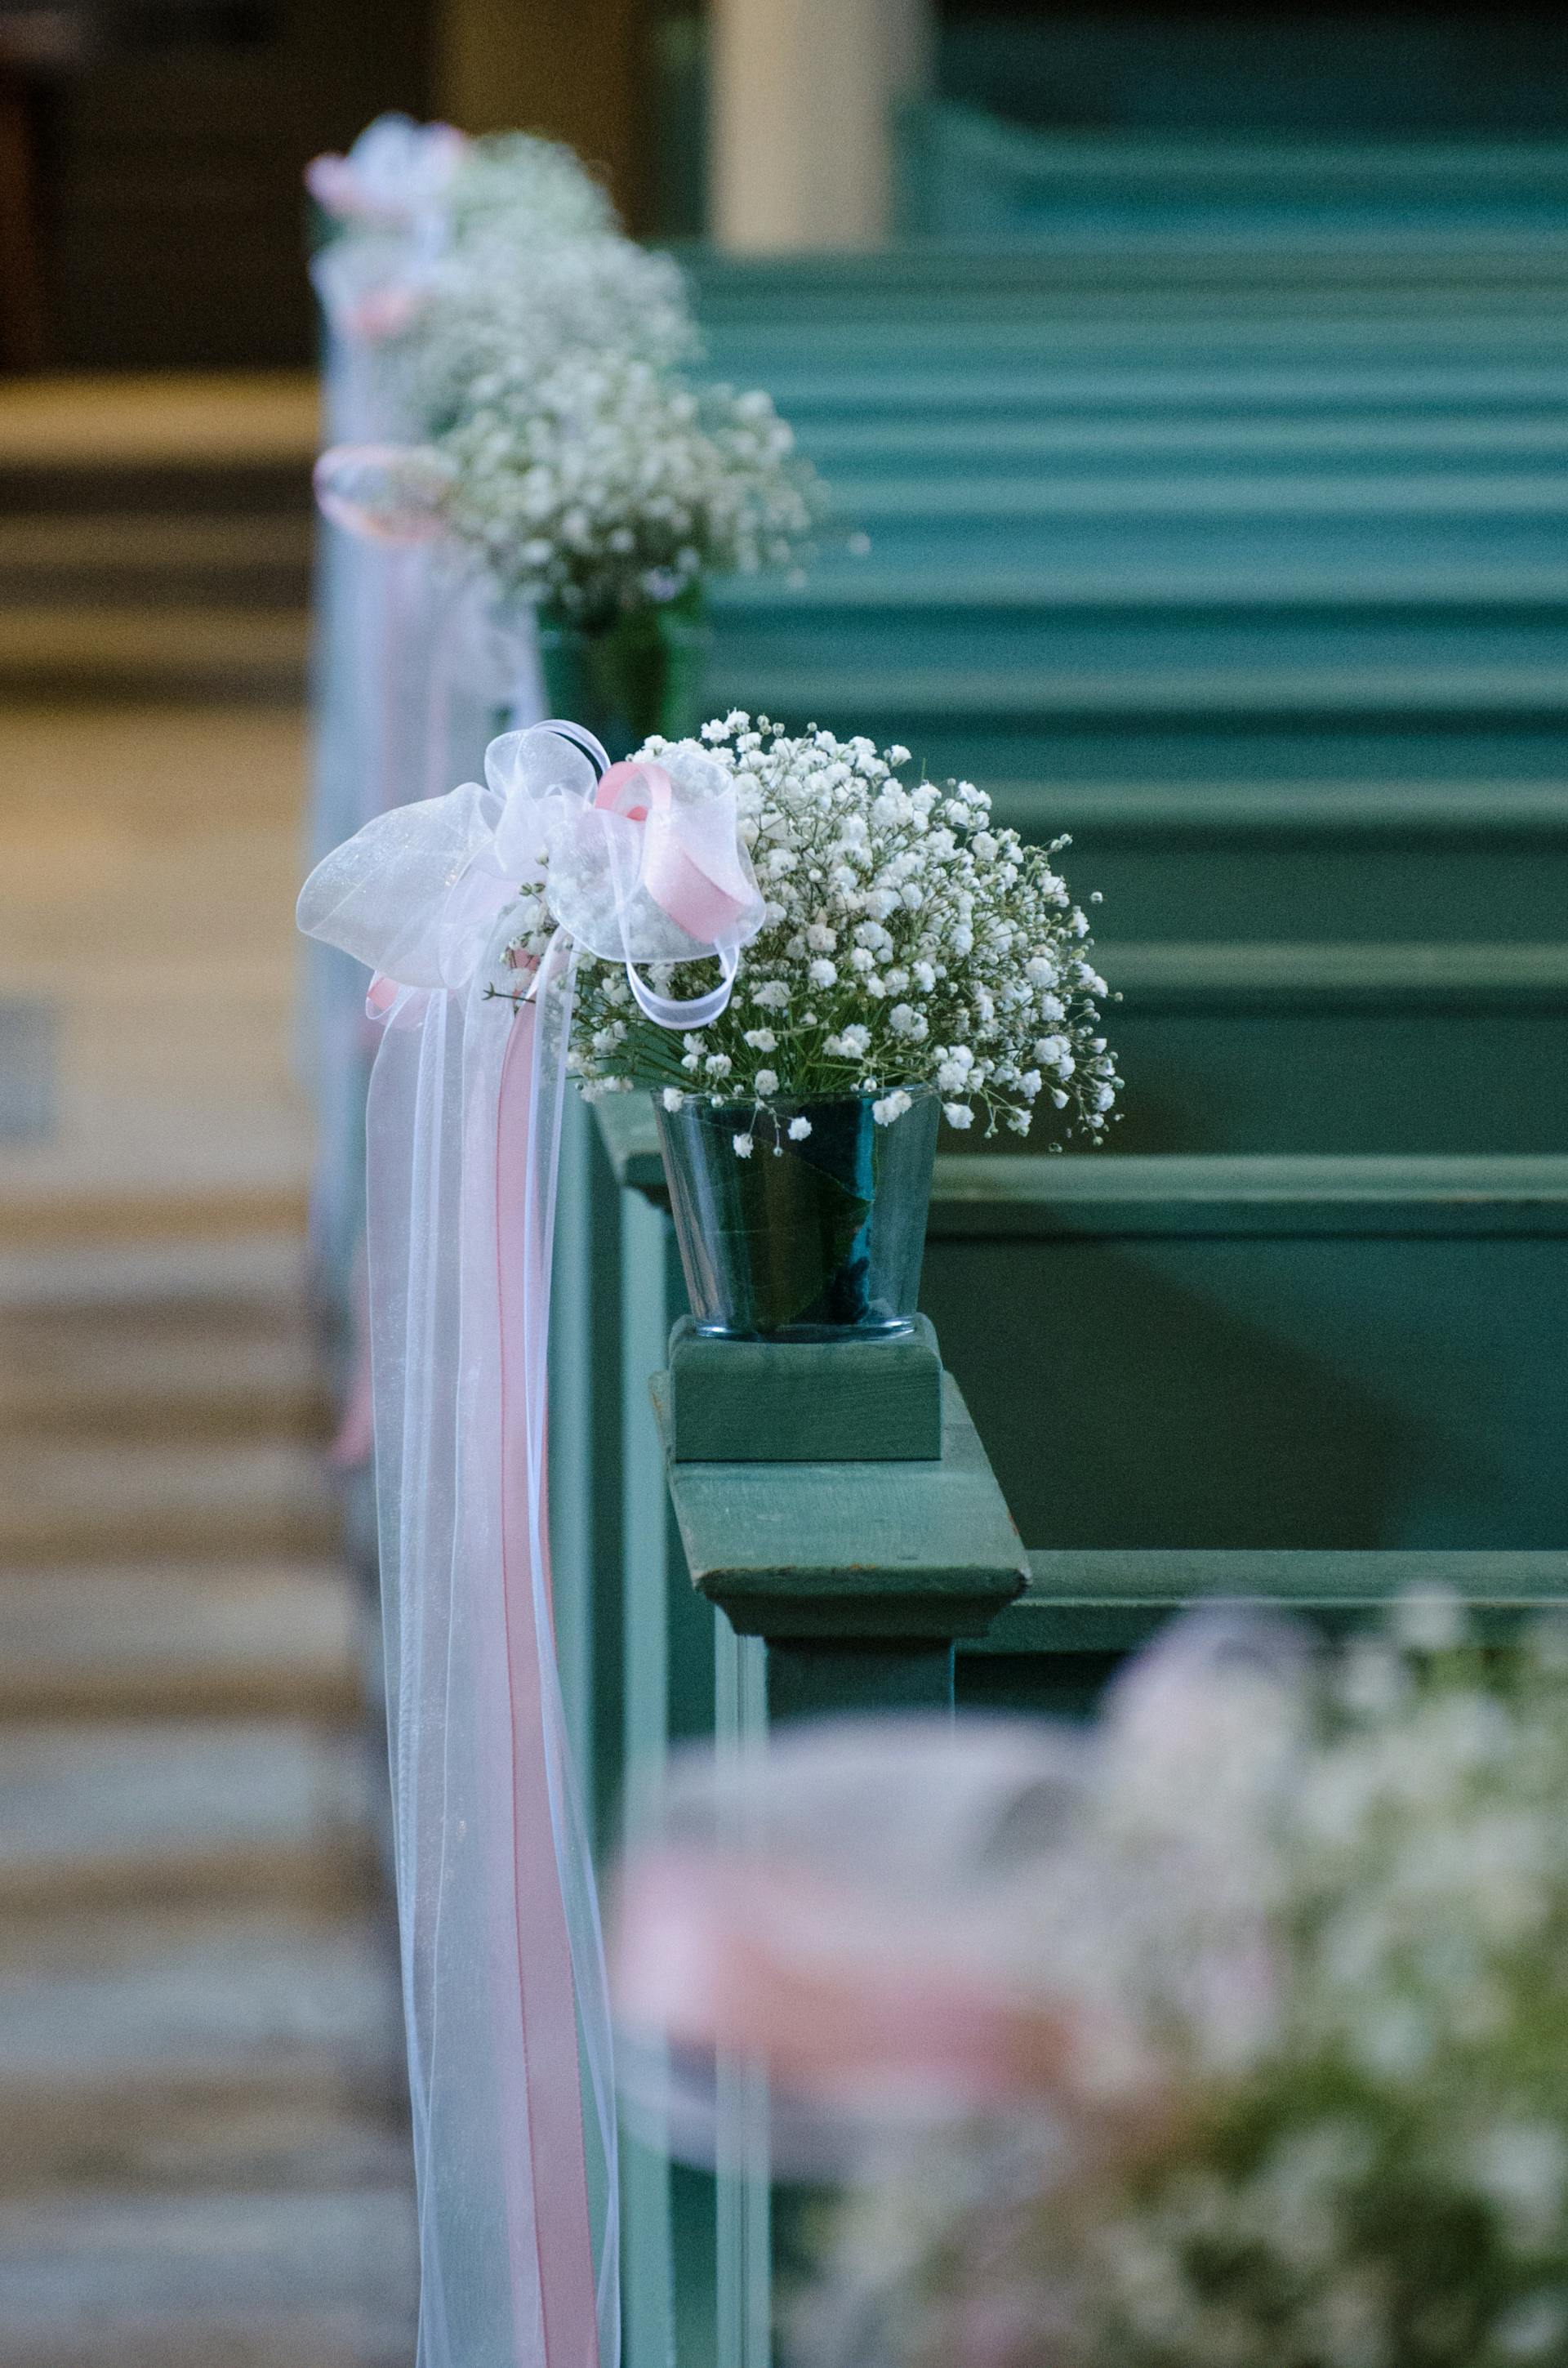 Flowers and tulle along church pews | Source: Pexels